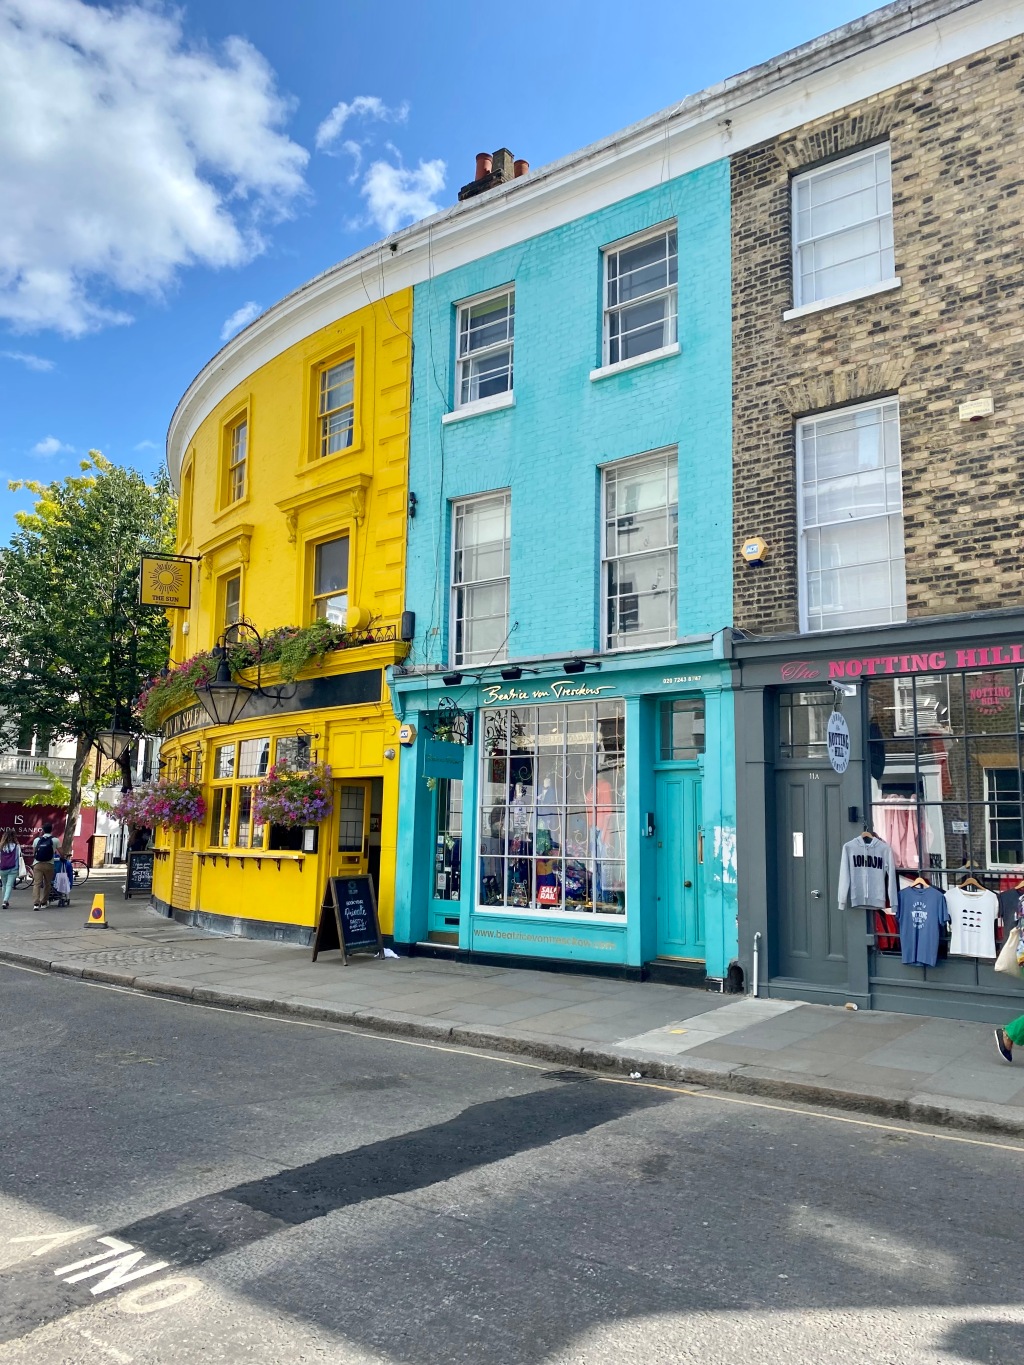 Top 5 Things to Do in Notting Hill, London.